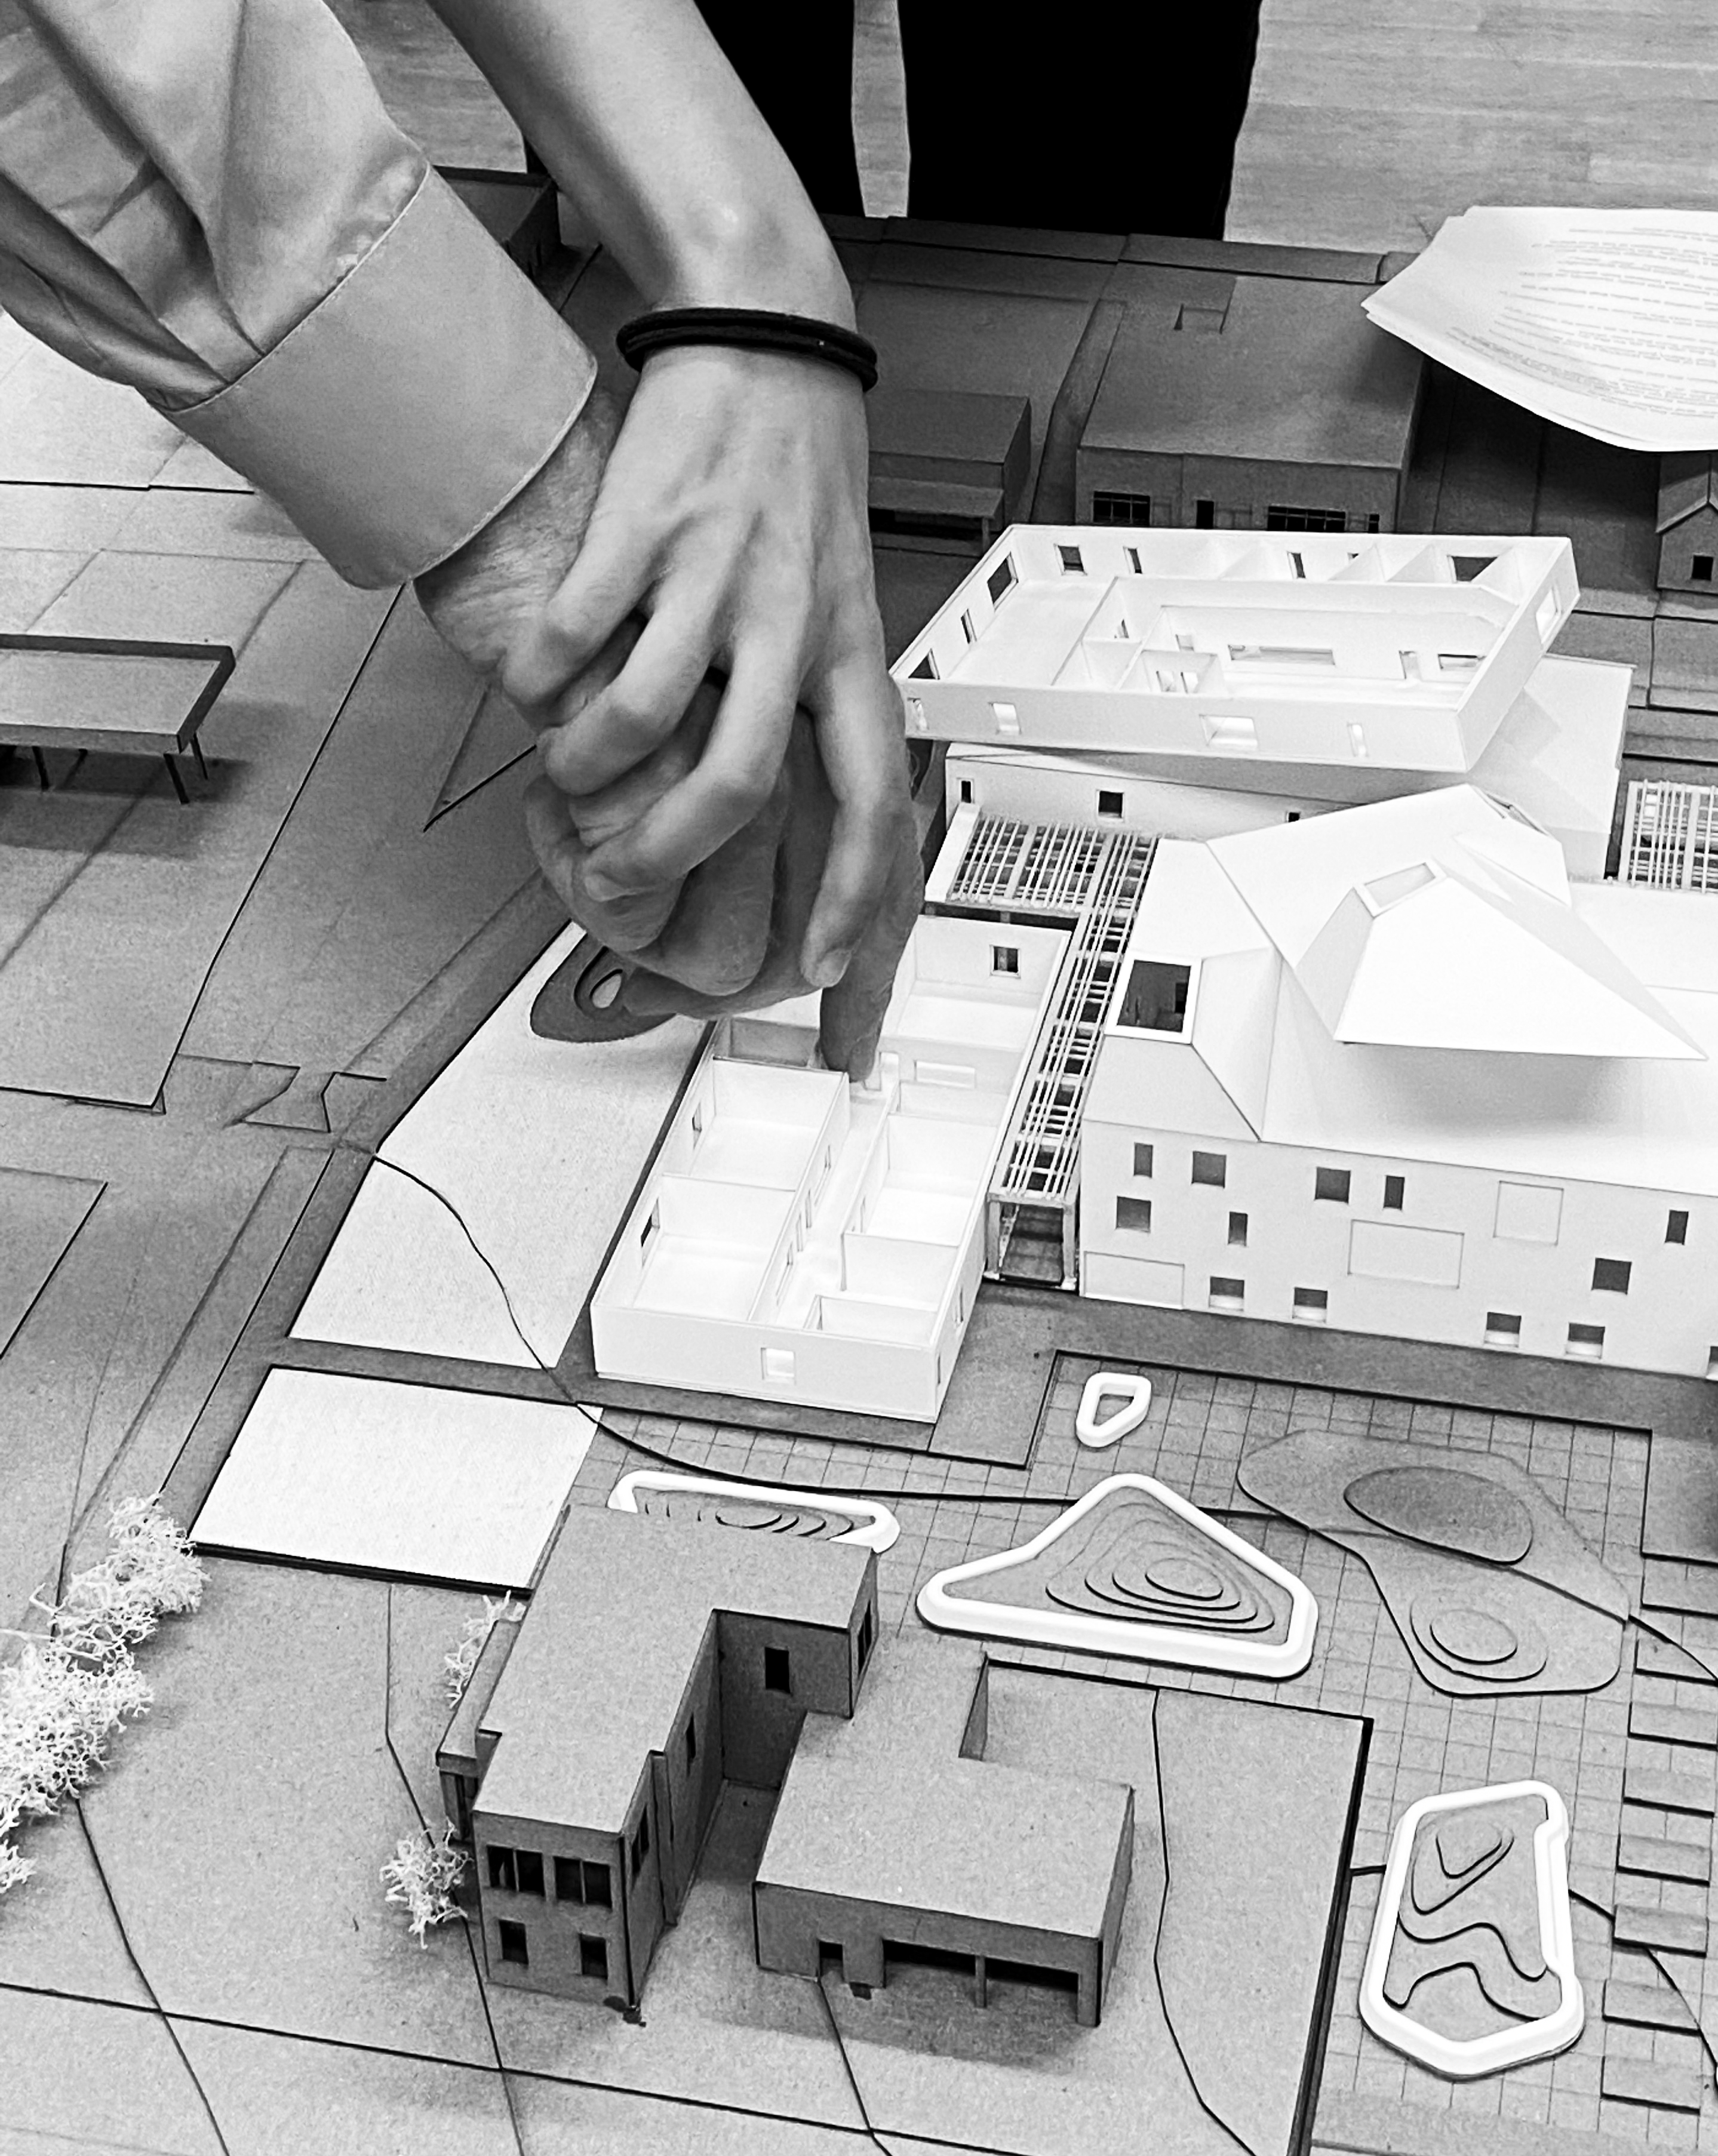 Black and white photo of a hand guiding another person's hand towards an architectural model